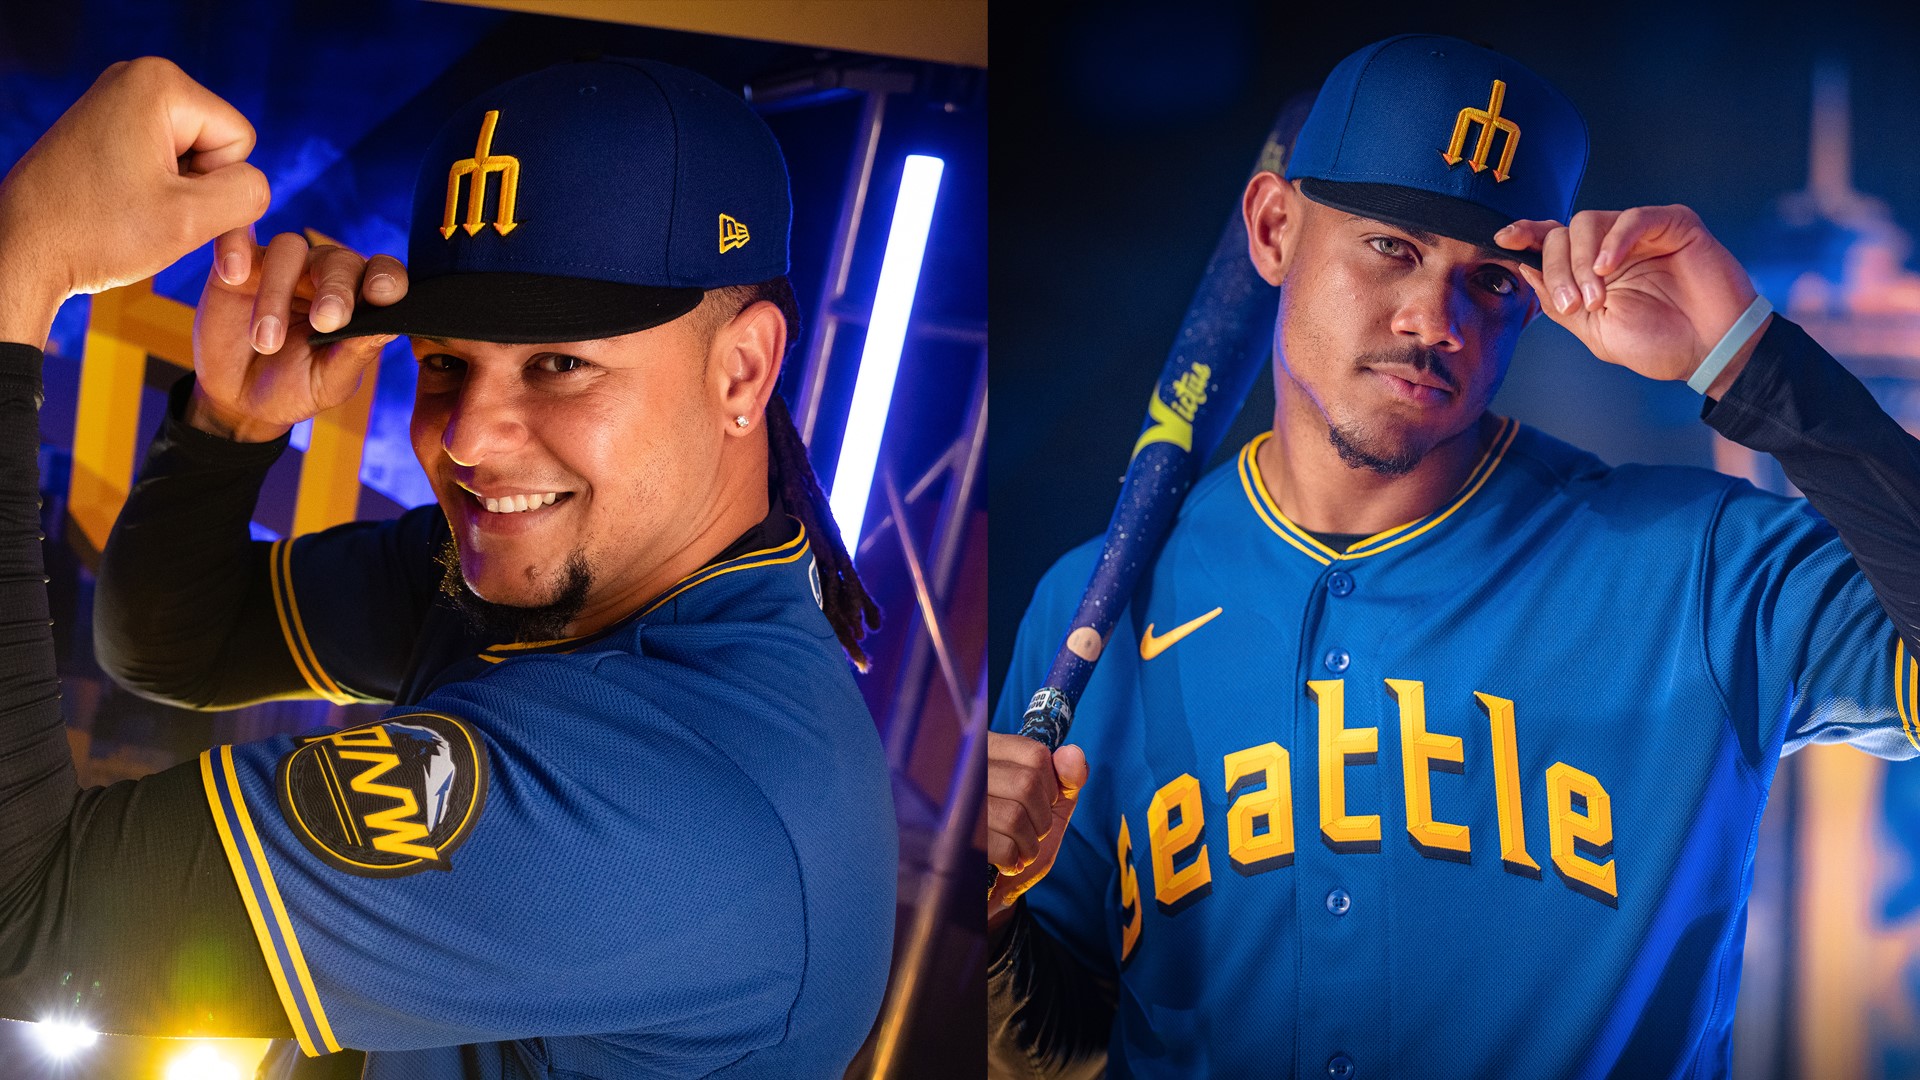 mlb the show city connect jerseys